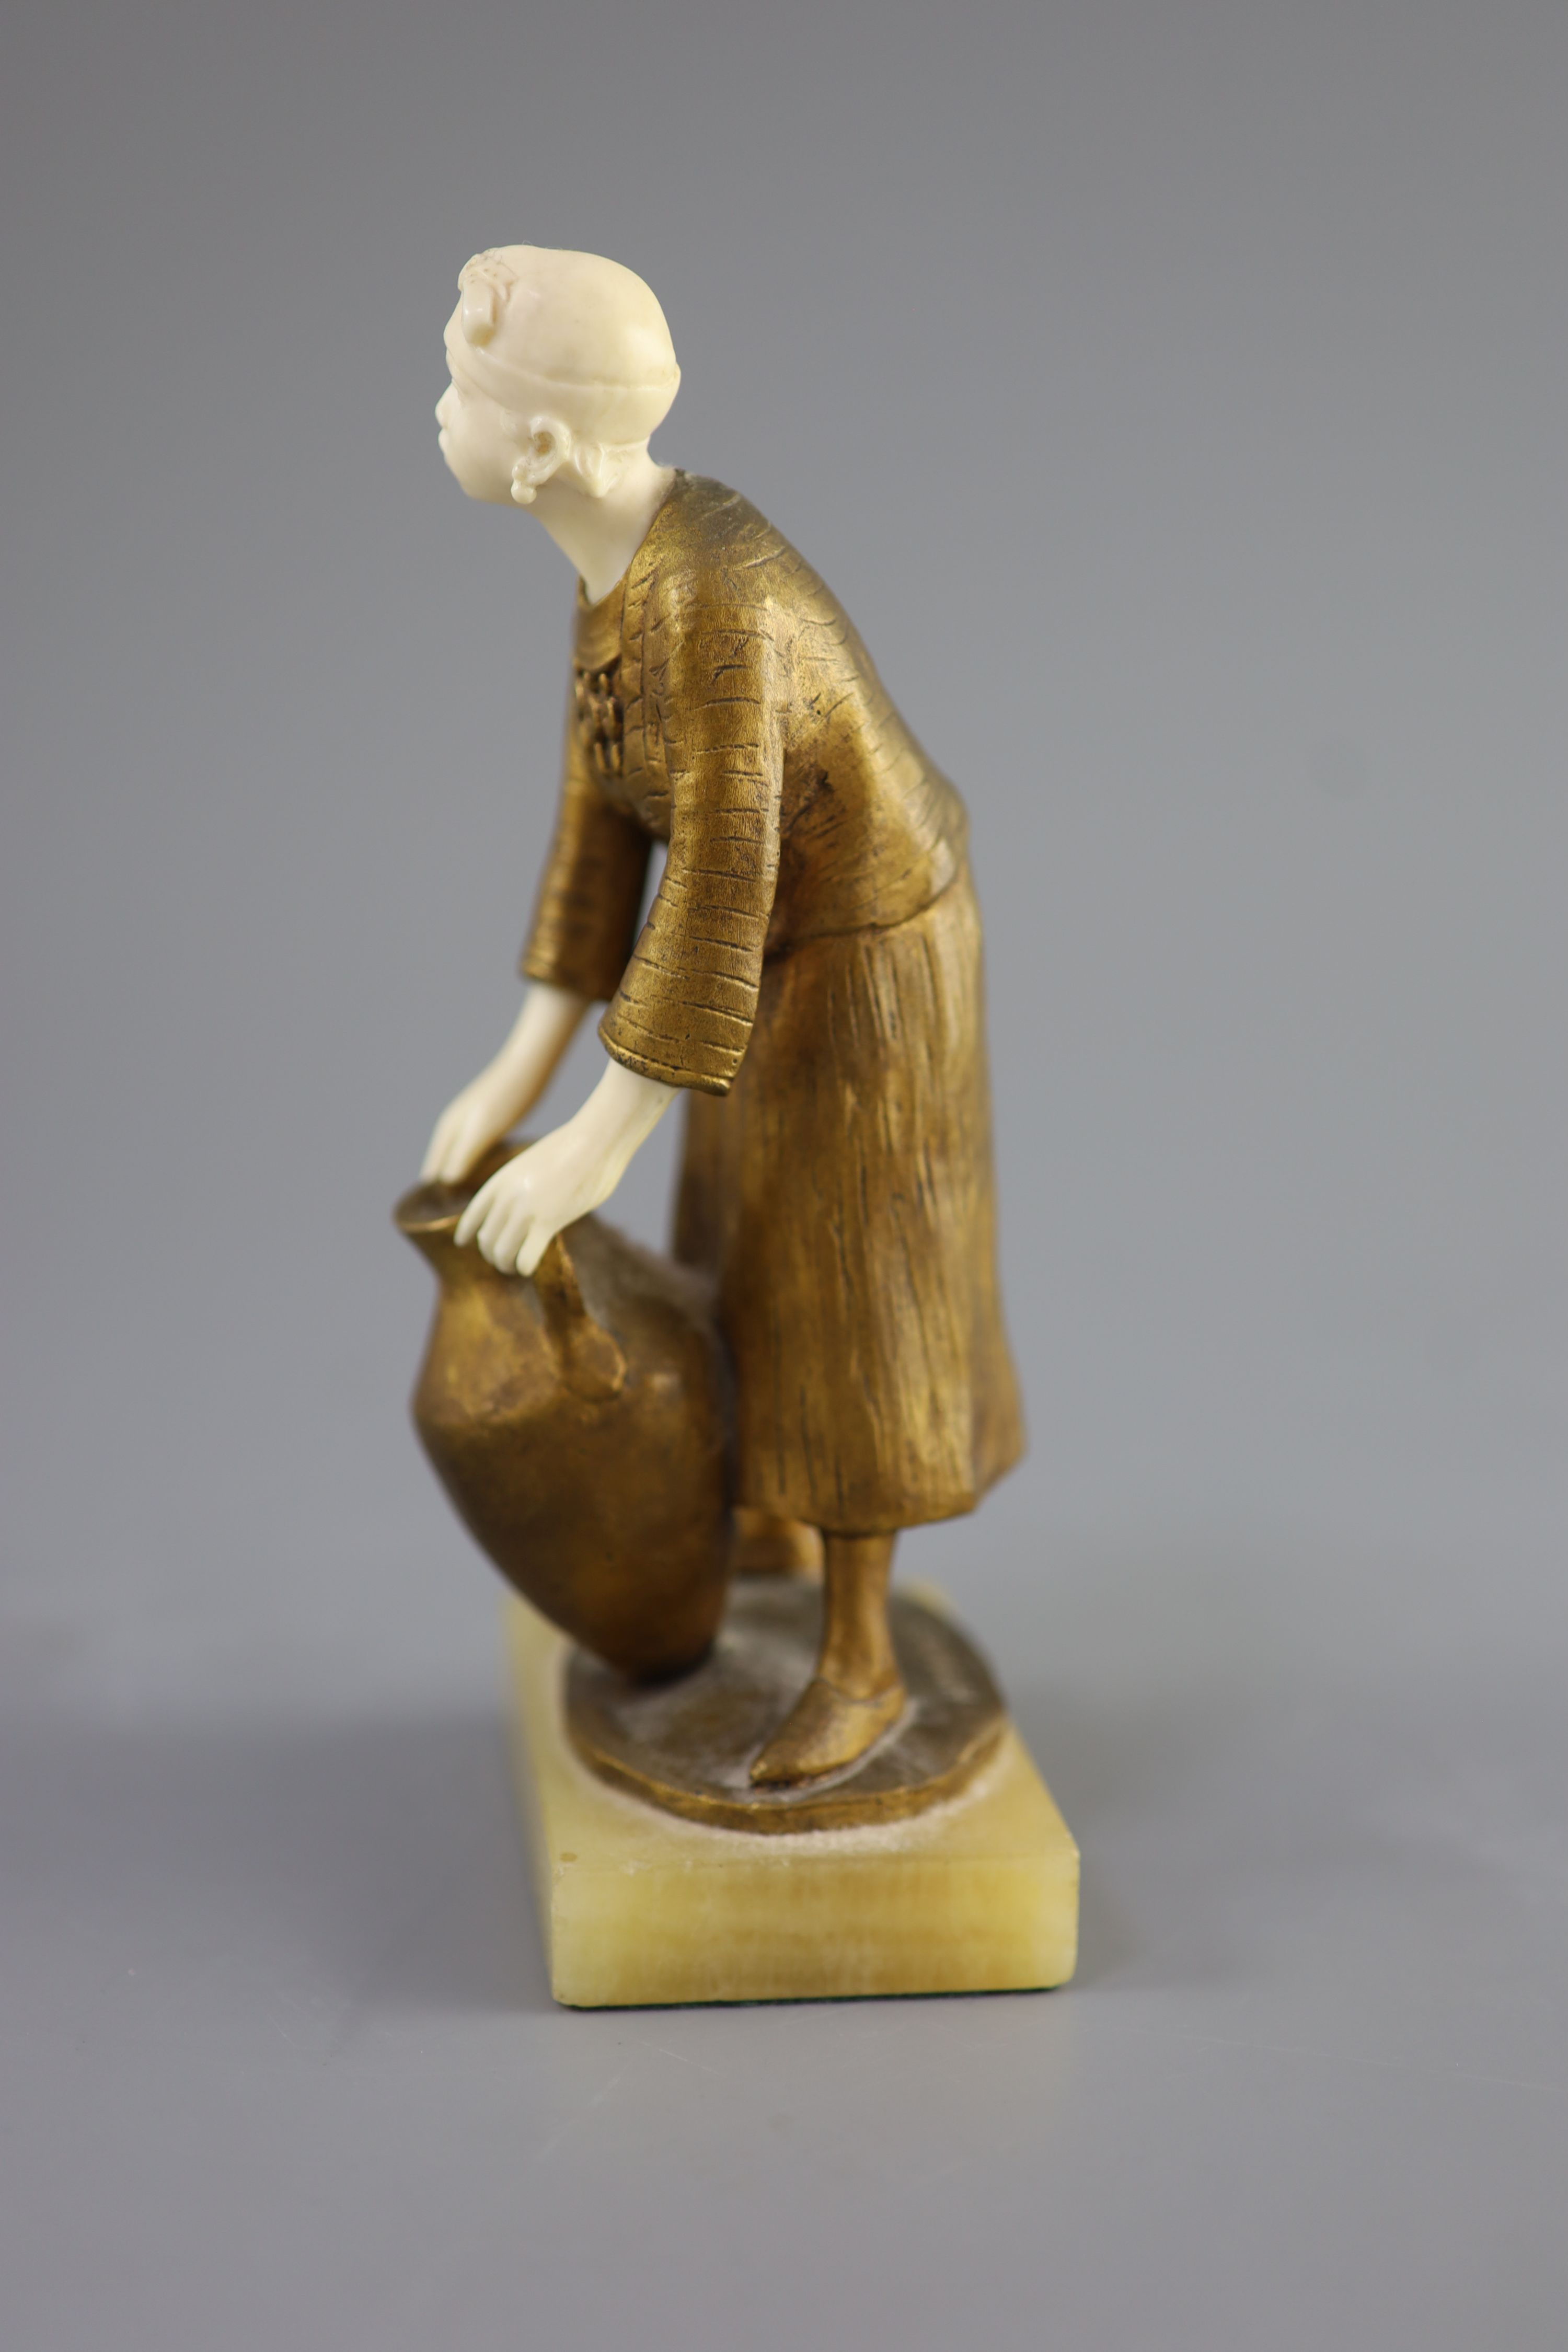 Hélène Maynard White (American, b.1870). A bronze and ivory study of an African girl with amphora base, c1920, 19cm high